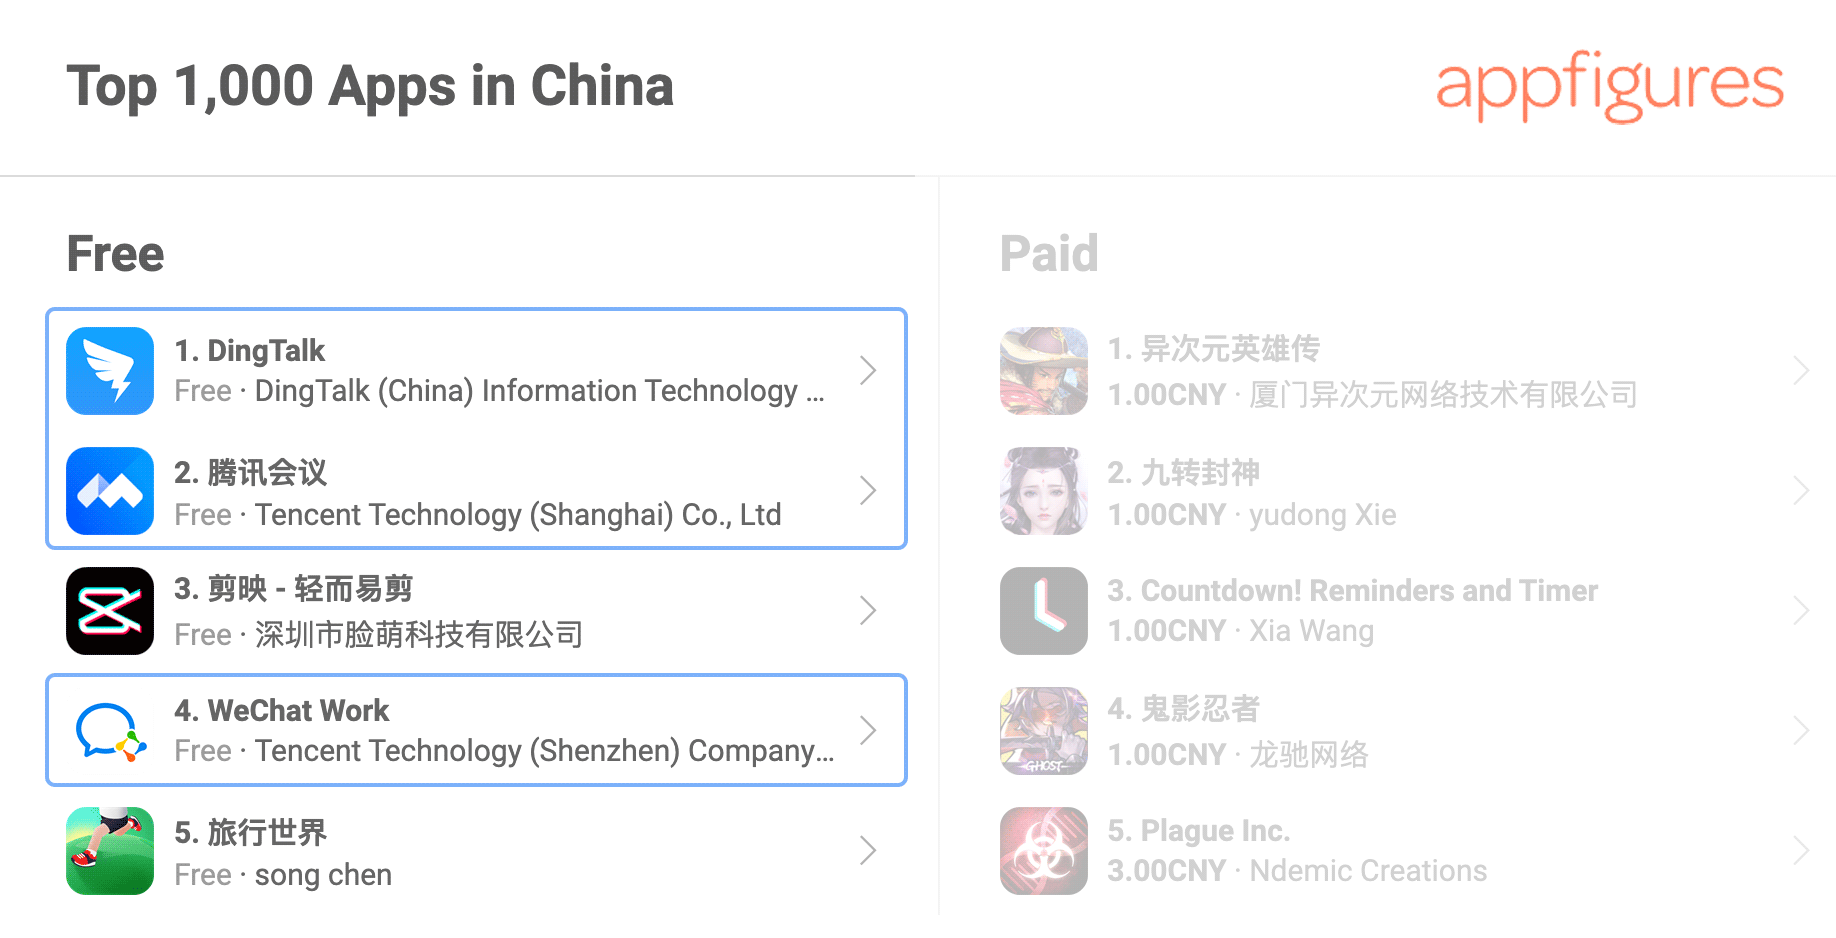 Top apps in China